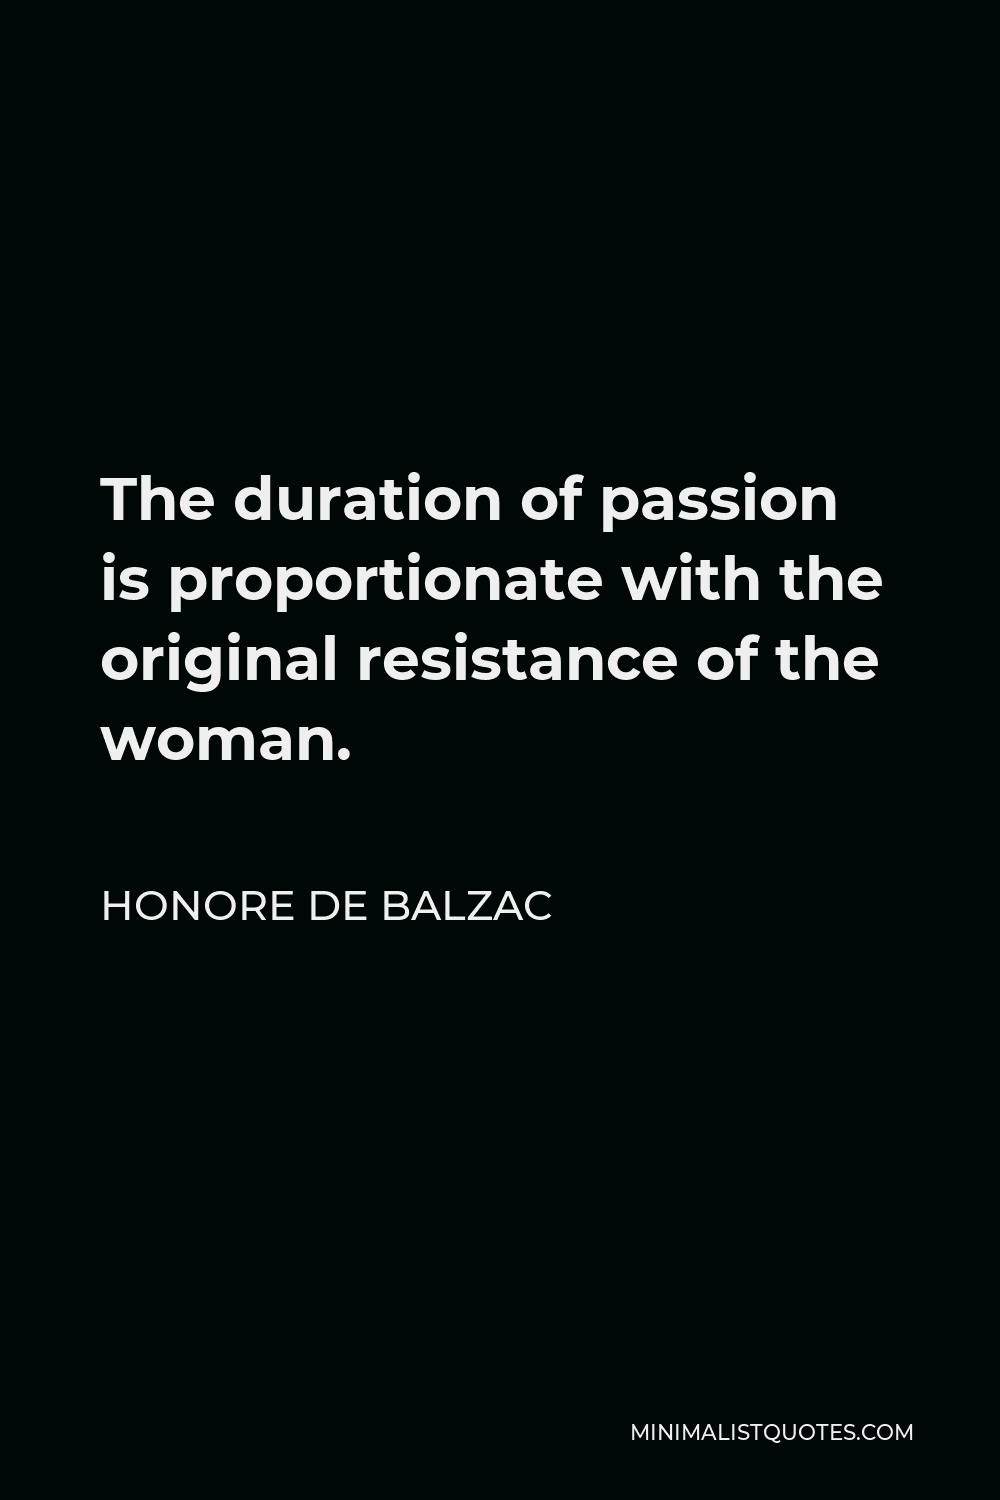 Honore de Balzac Quote - The duration of passion is proportionate with the original resistance of the woman.